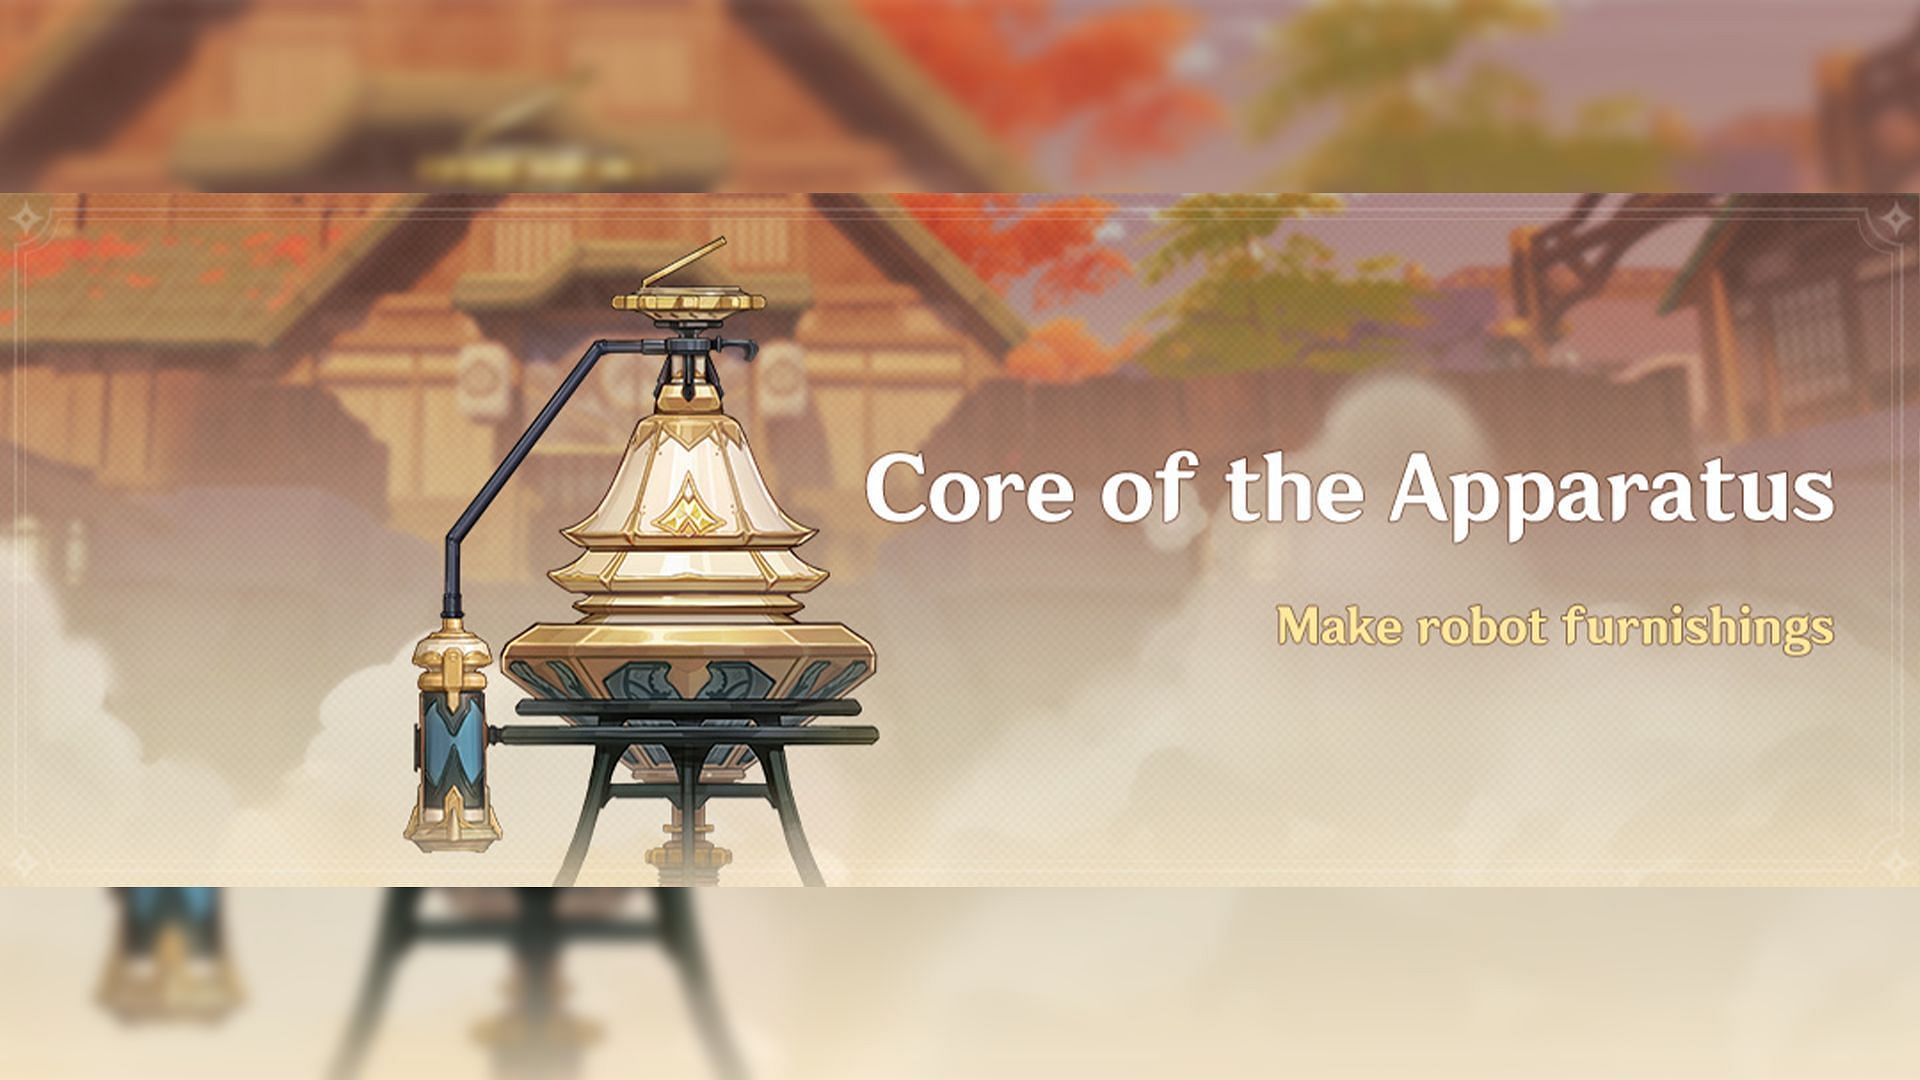 The Core of the Apparatus event (Image via HoYoverse)